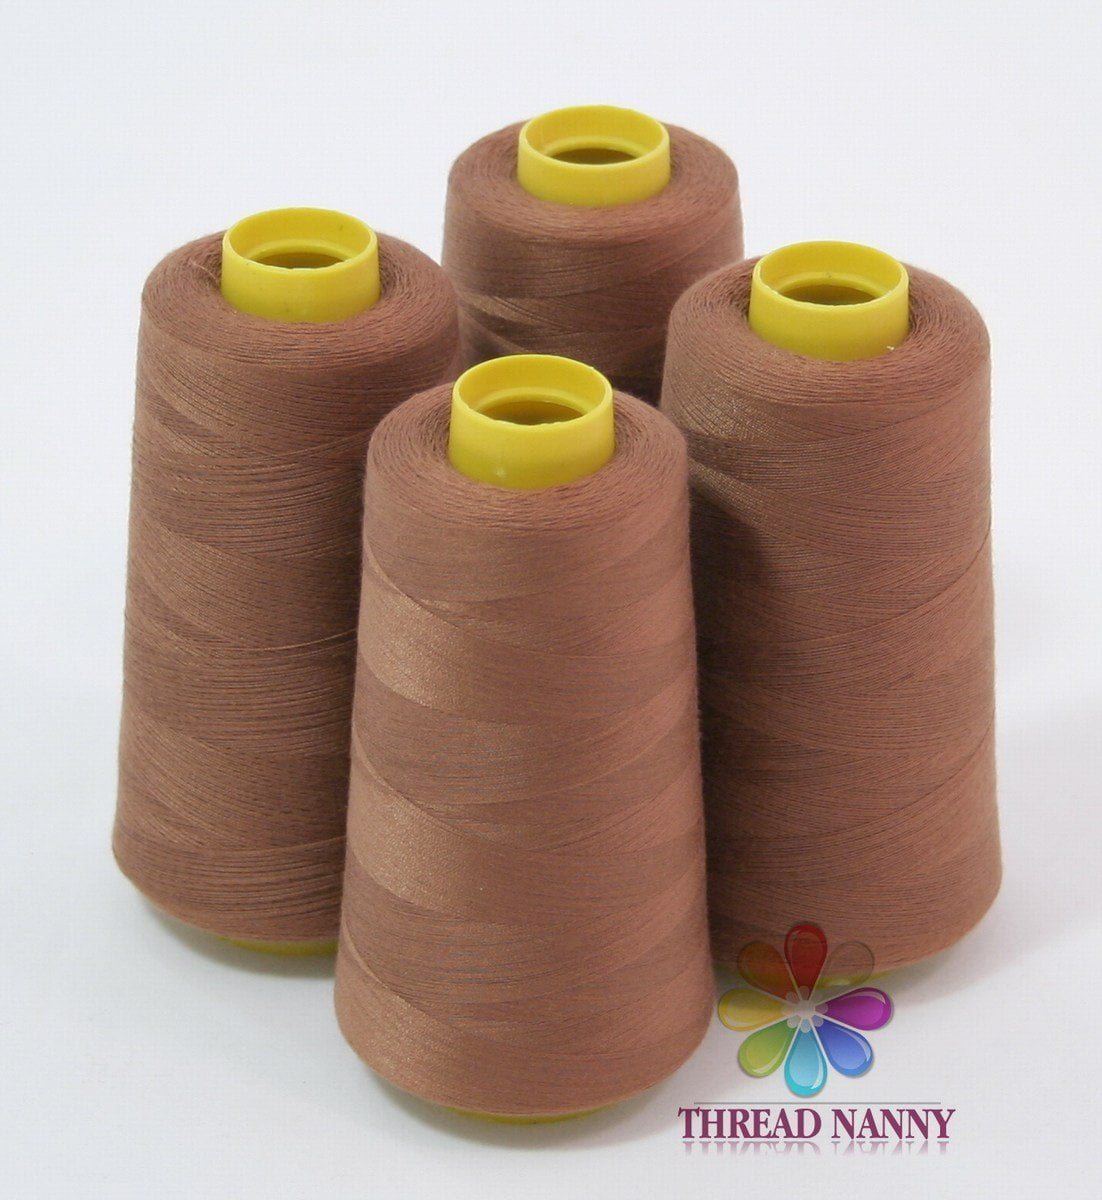 4 Large Cones of Polyester threads for Sewing Quilting Serger GOLD Color from ThreadNanny 3000 yards each 